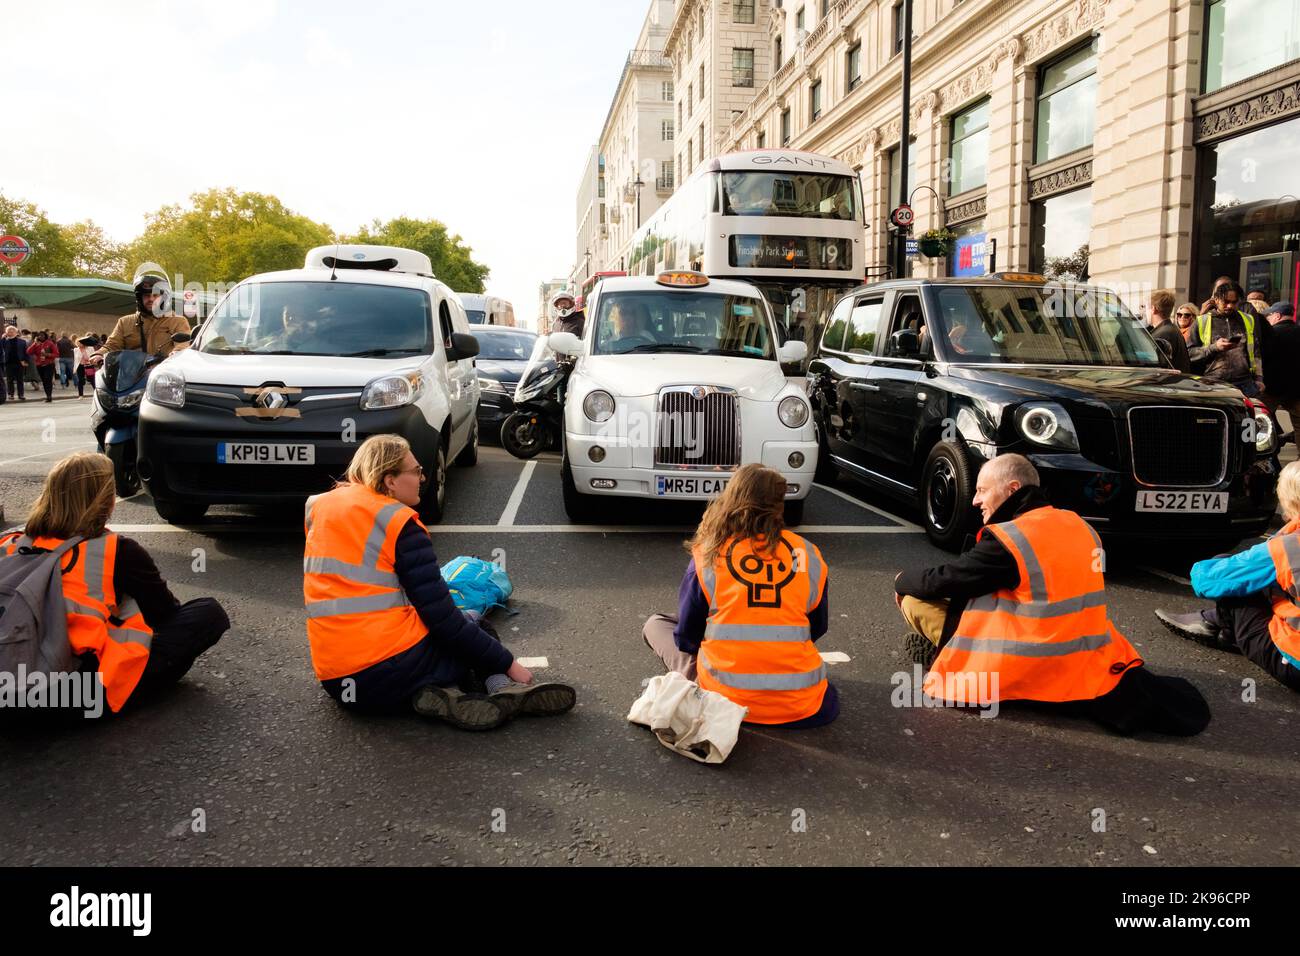 London, UK. 26 OCT 2022. Just Stop Oil activists block Piccadilly rd. by green park tube station. Angry drivers dragged some of the protesters and the pollice arrested them. Stock Photo